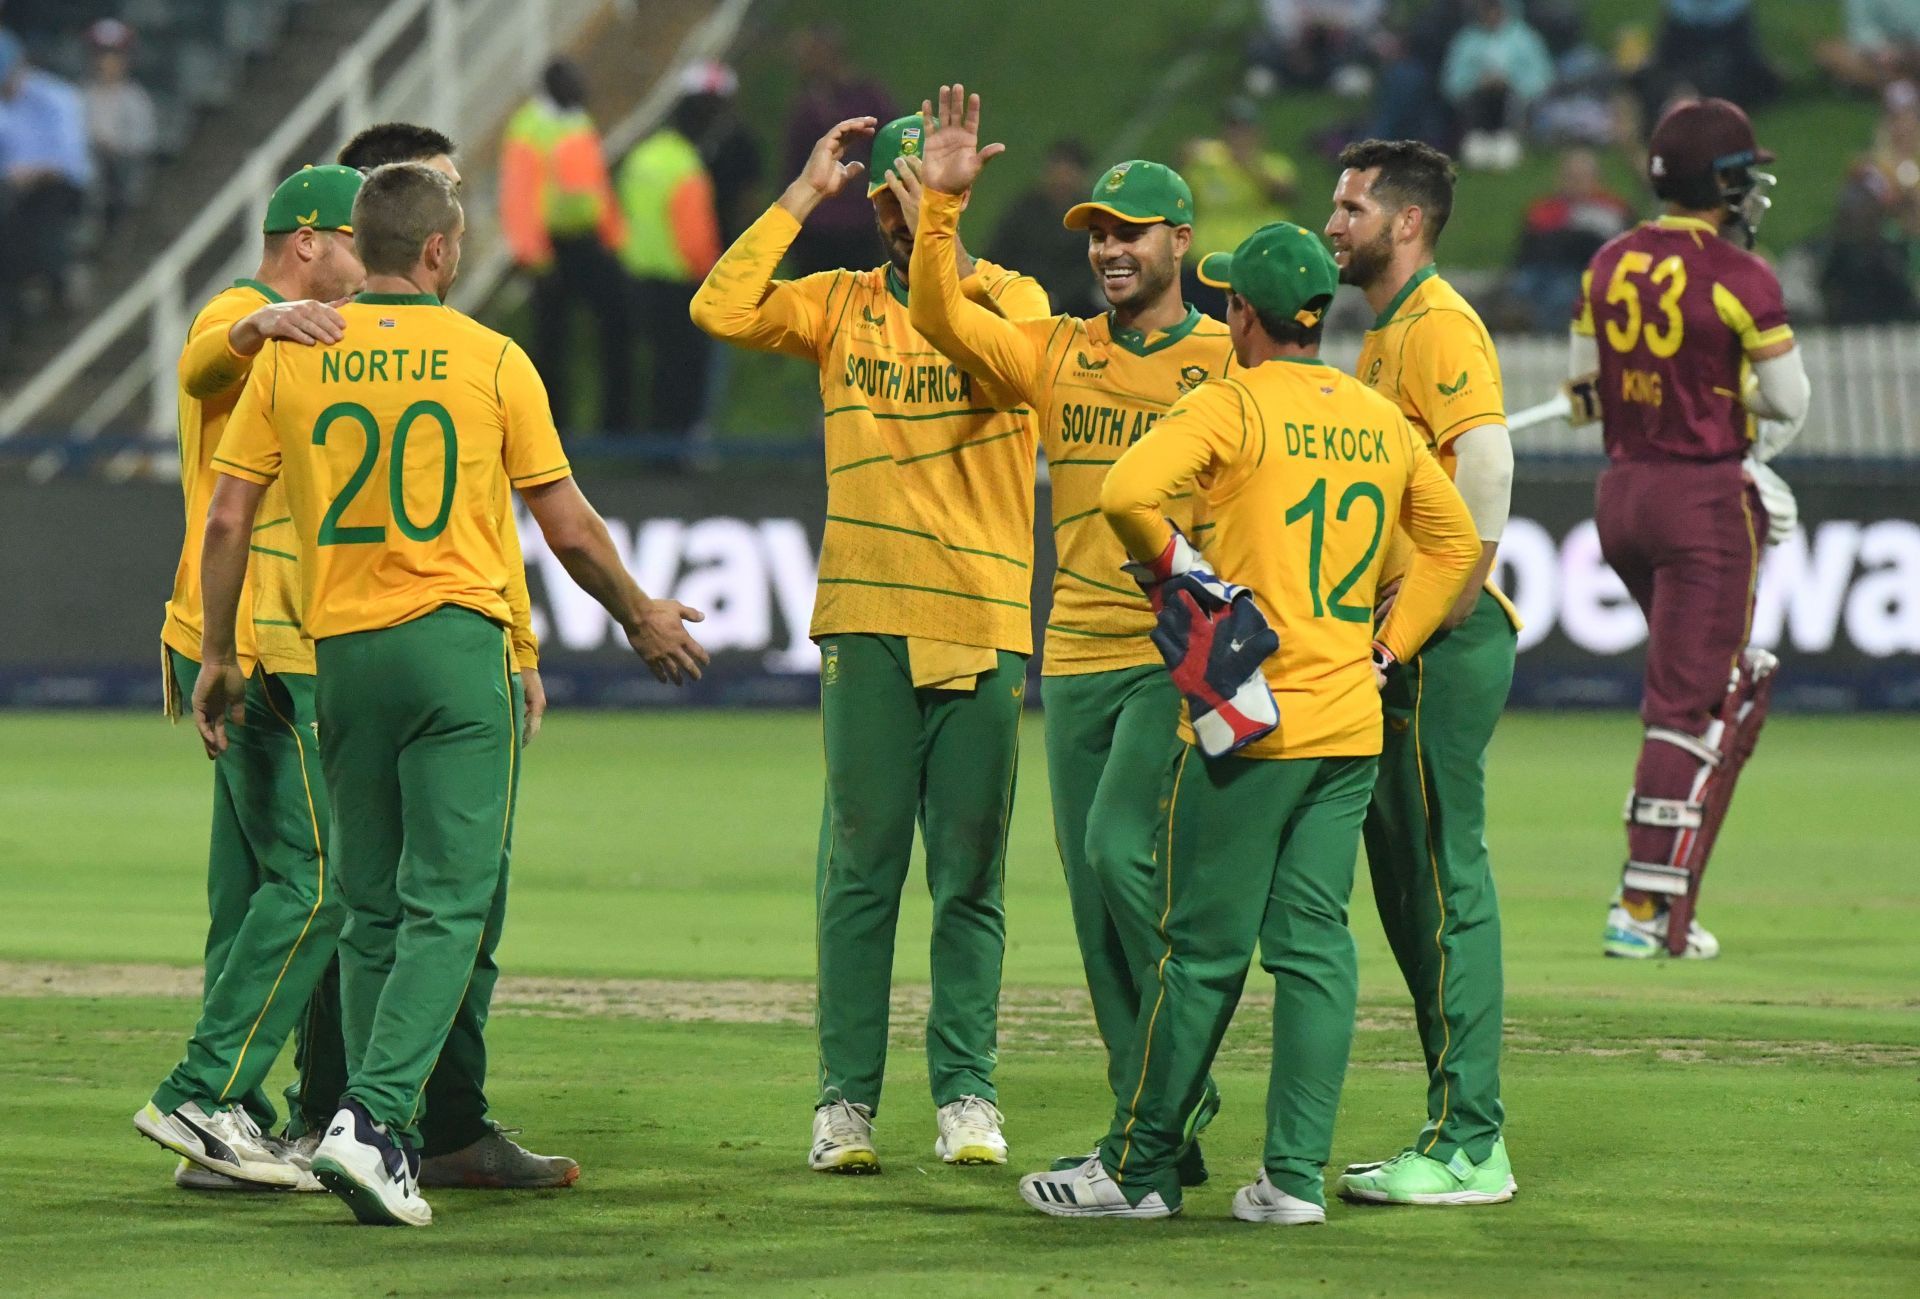 South Africa v West Indies - 3rd T20 International